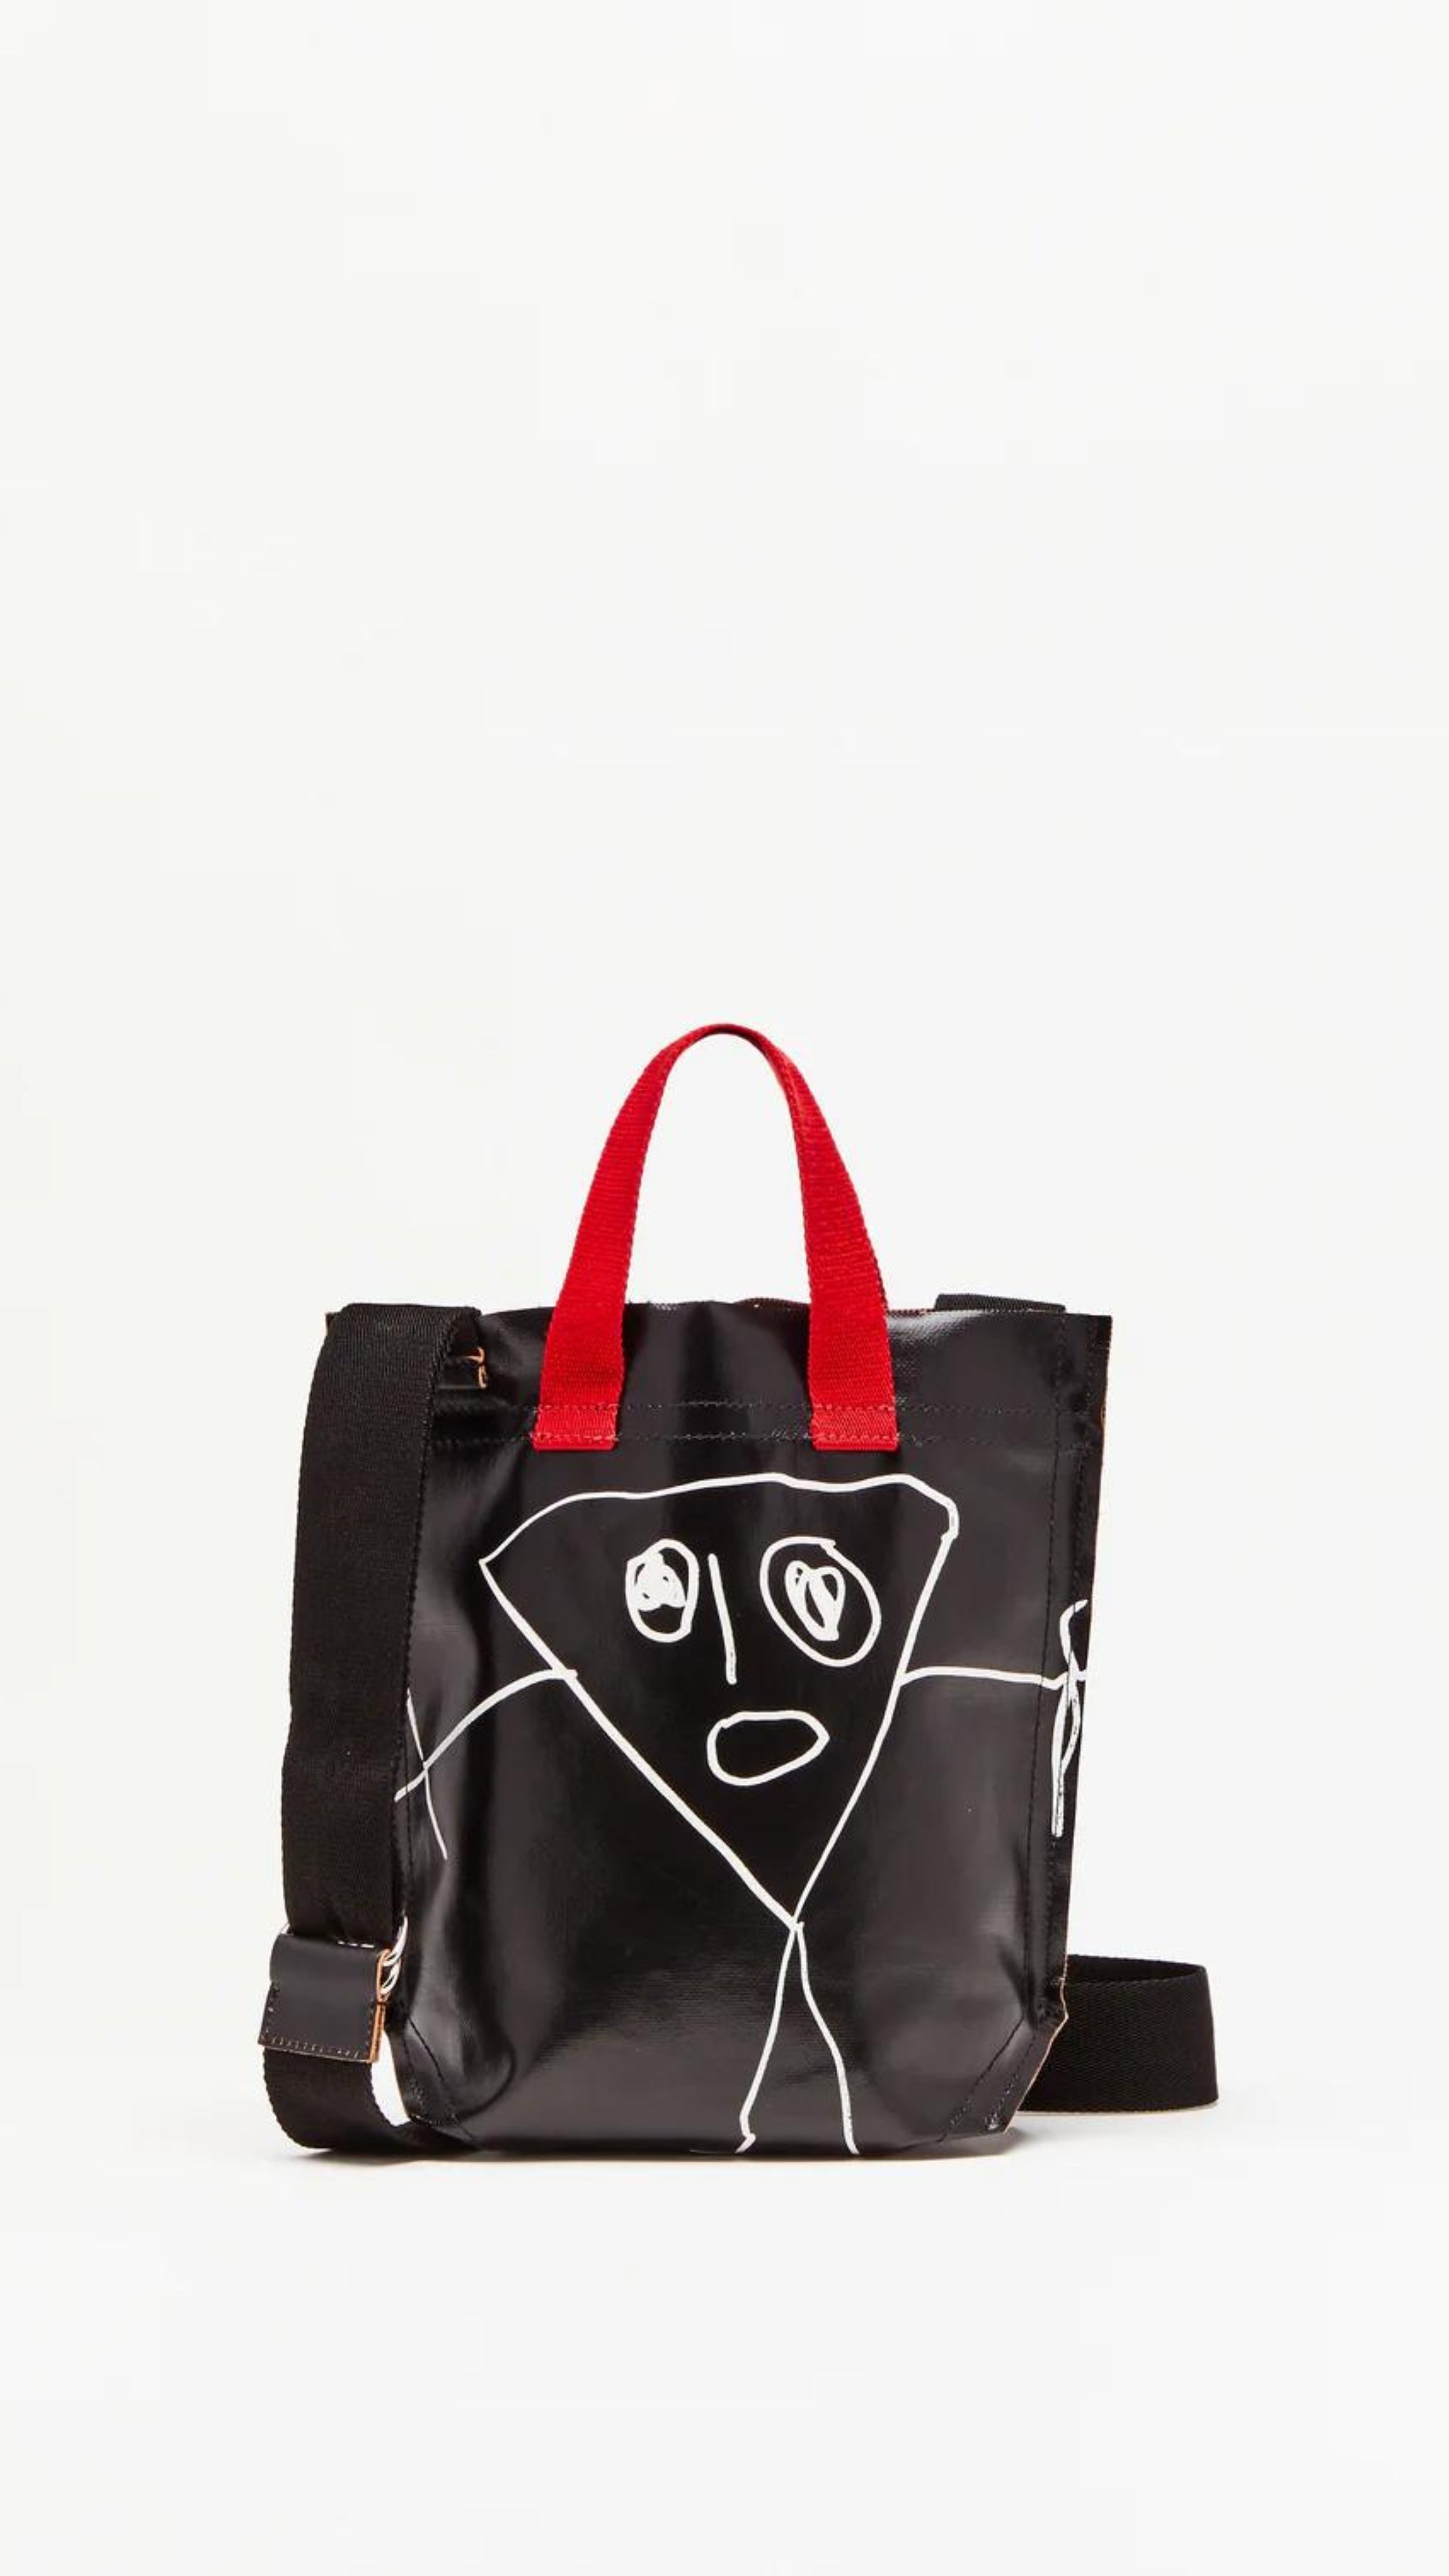 Plan C Pili and Bianca Black Mini Shopper. Coated canvas mini shopper style bag with whimsical drawings on either side. Completed with a red handle strap and a long black strap. Shown with straps.